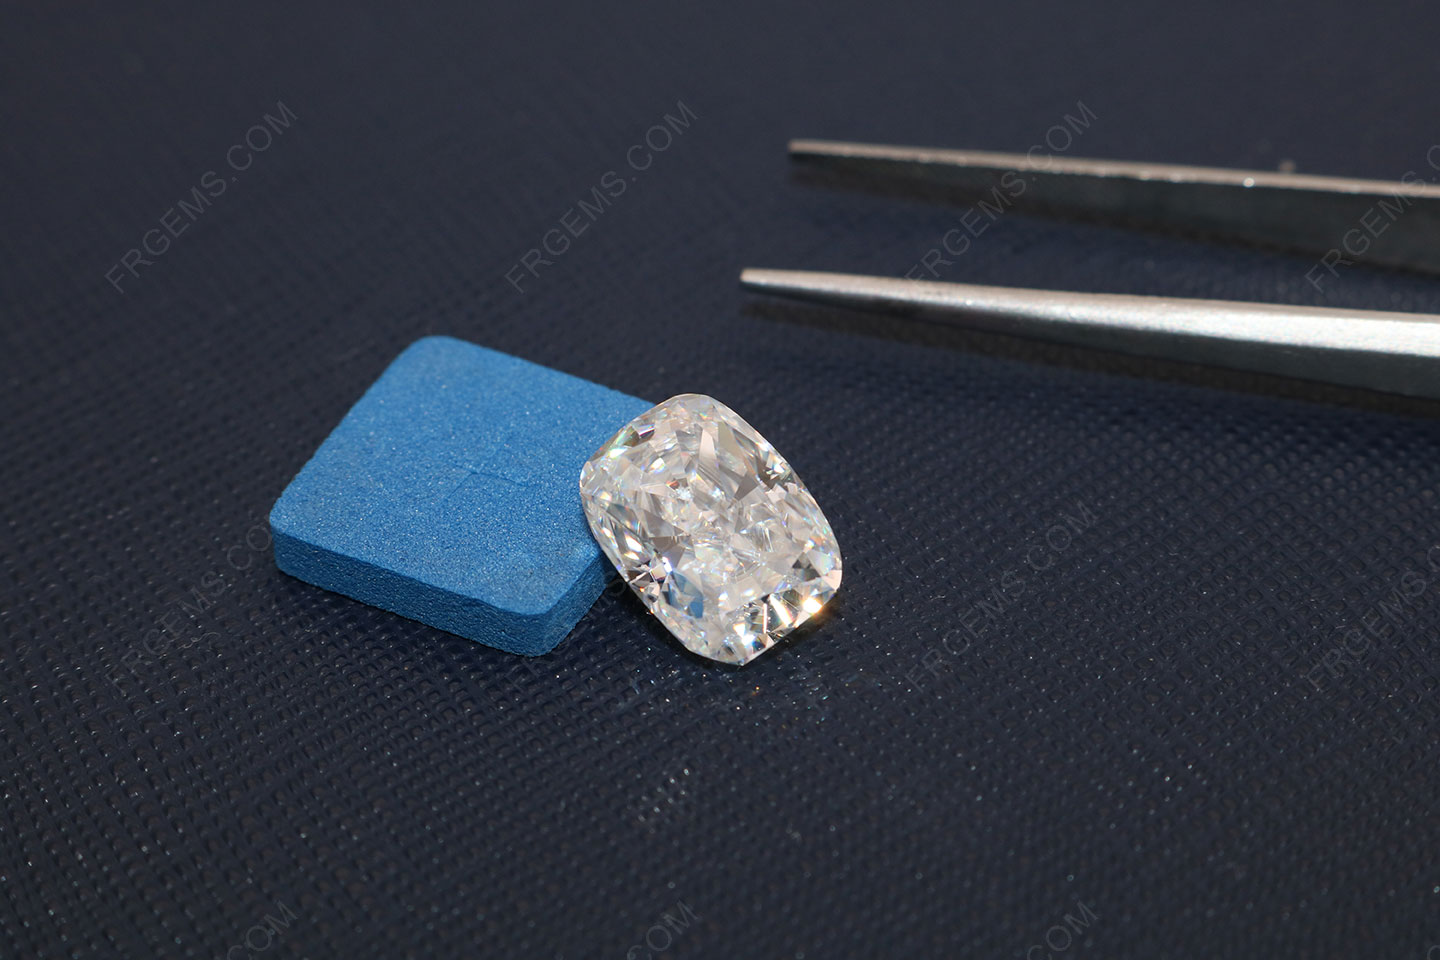 Loose Moissanite D White Color Elongated Cushion Shape Crushed ice cut 11x9mm Gemstones Supplier